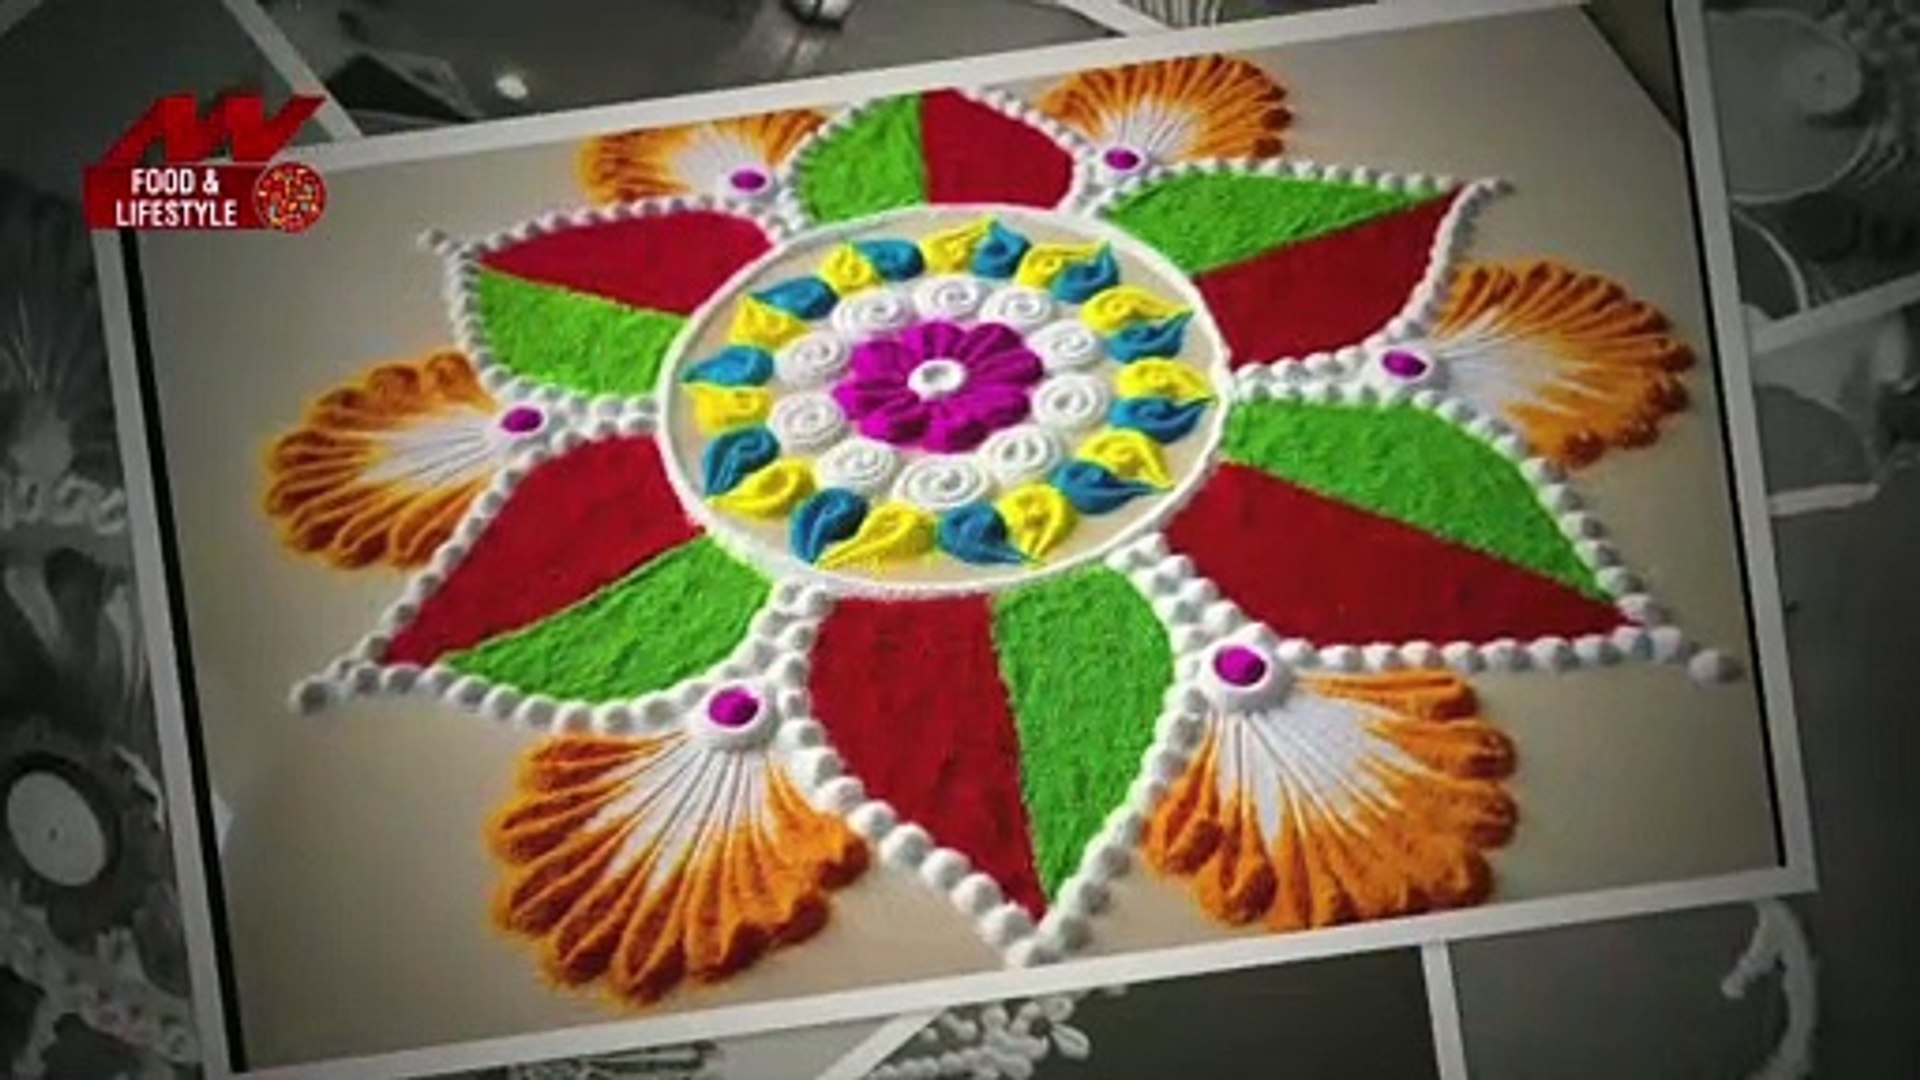 Check Out These Latest Rangoli Designs To Make On Diwali - video Dailymotion